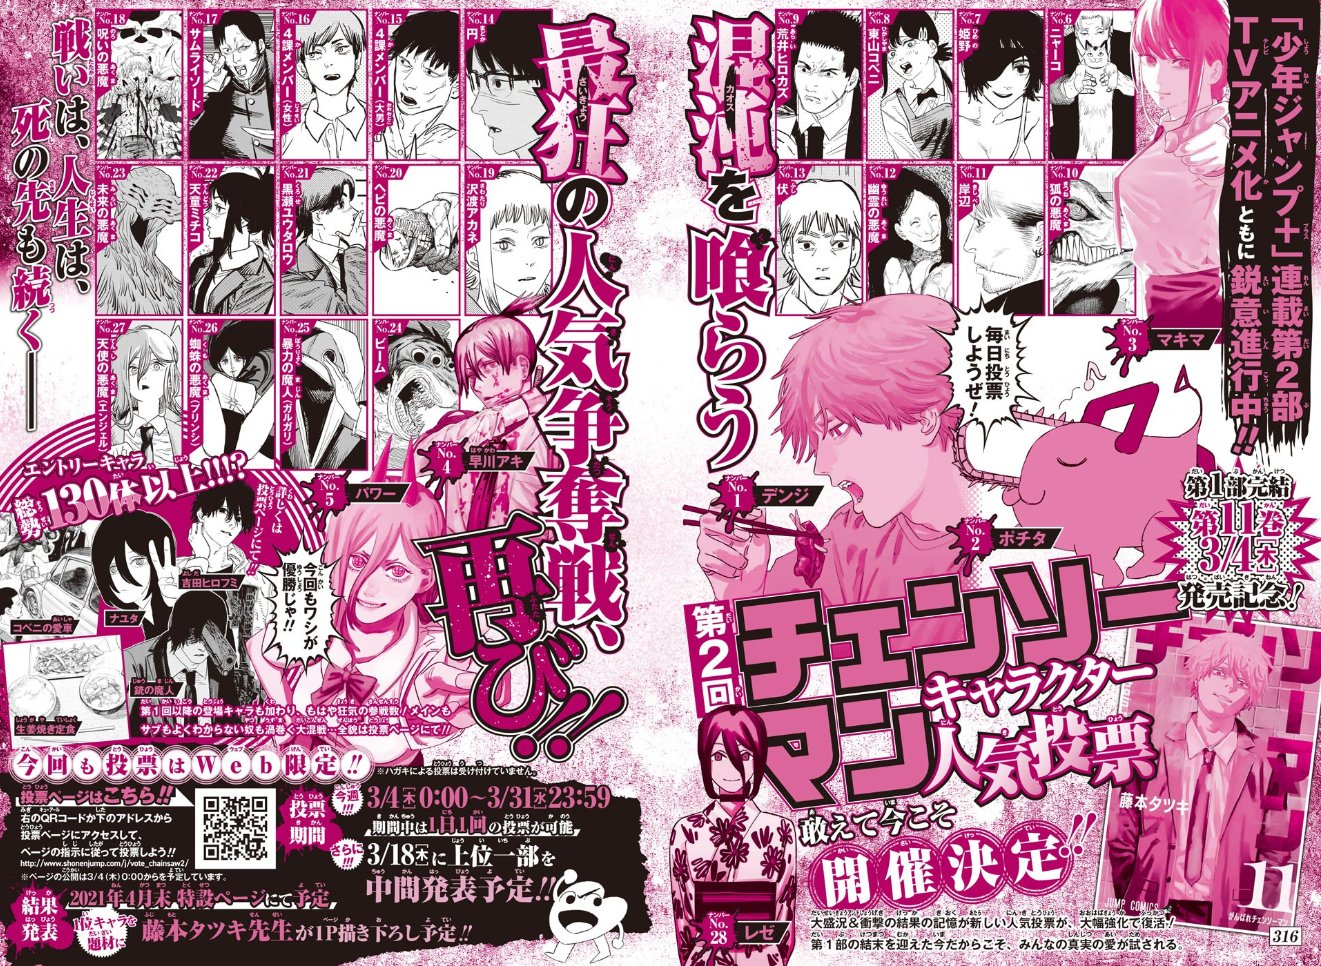 Chainsaw Man Popularity Poll Reveals Top Ten Most Popular Characters